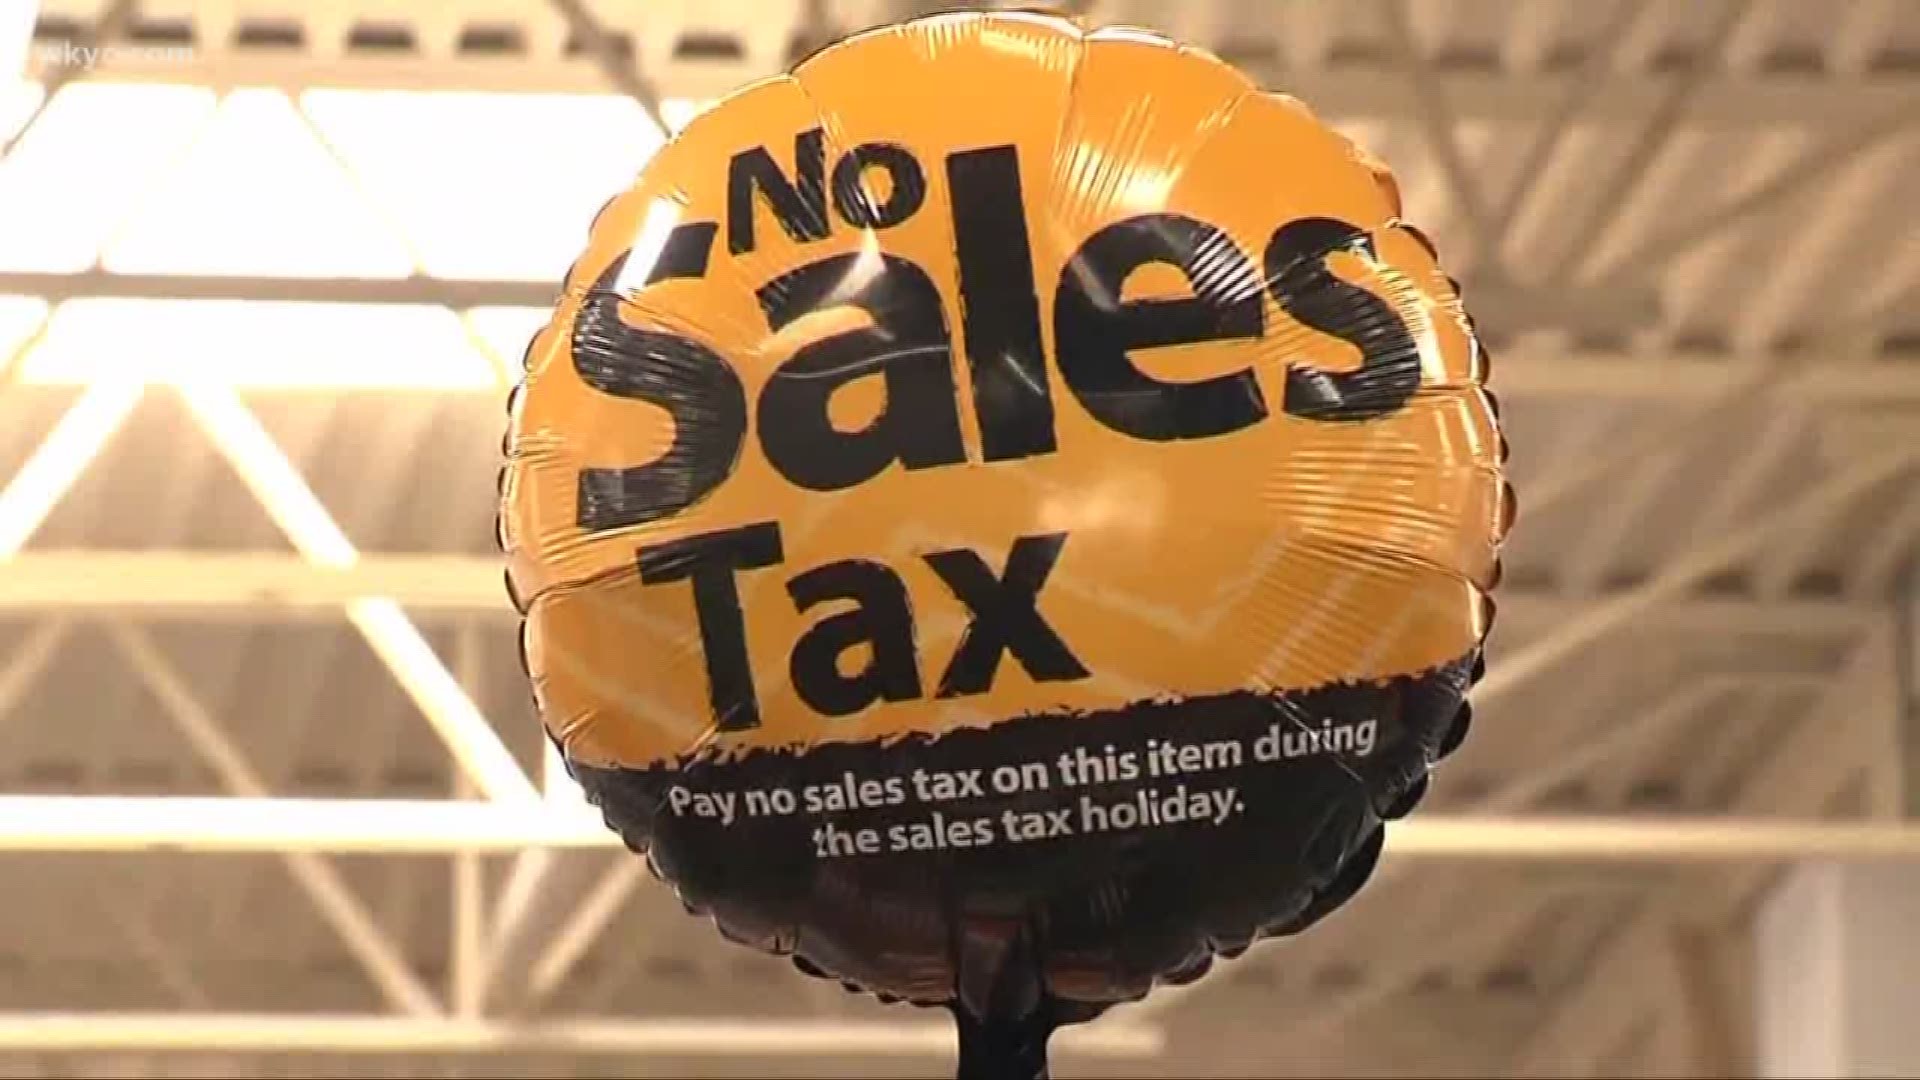 Aug. 2, 2019: Just in time for back-to-school shopping, Ohio's tax-free weekend is here again. But what can you buy without paying any sales tax? There are some restrictions, but don't worry... We've got you covered.